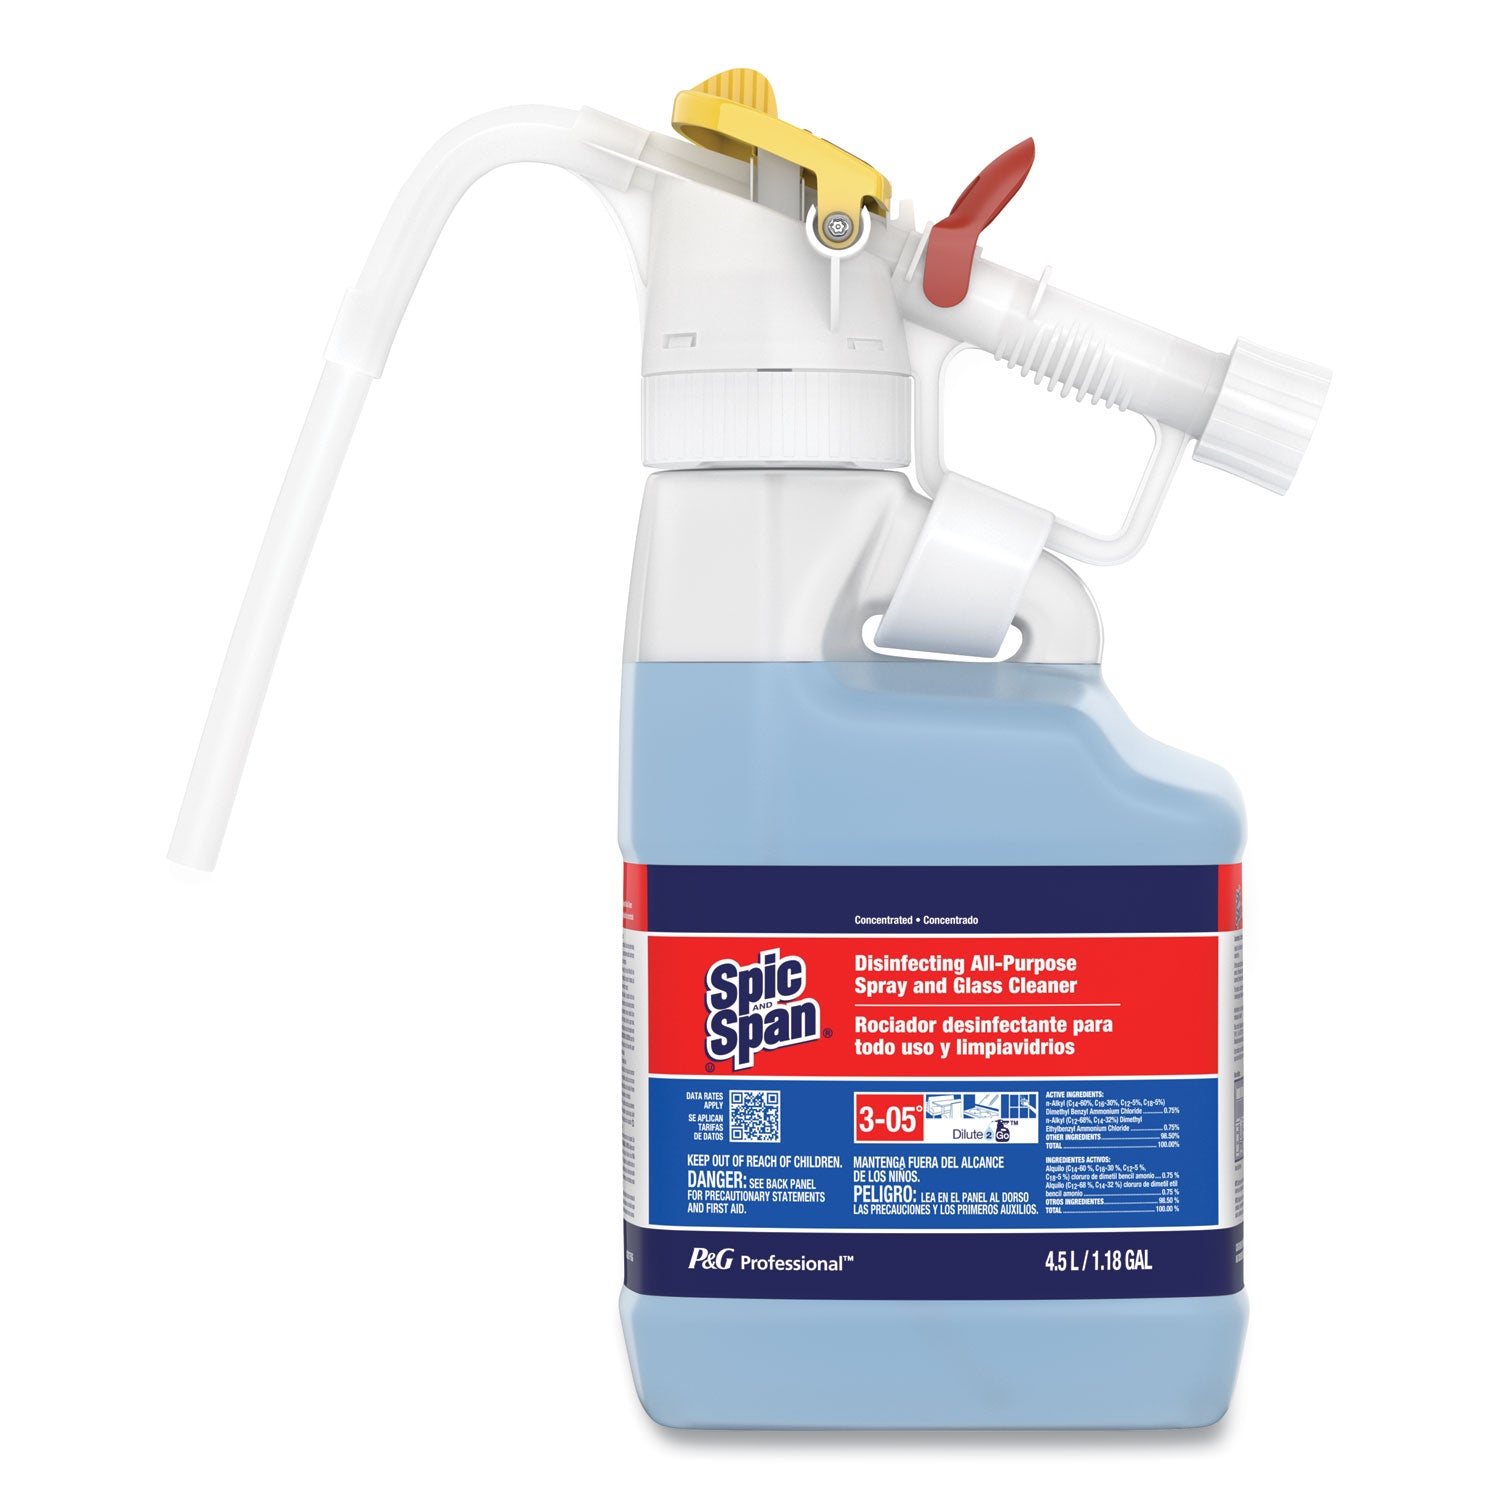 dilute-2-go-spic-and-span-disinfecting-all-purpose-spray-and-glass-cleaner-fresh-scent-45-l-jug-1-carton_pgc72001 - 1